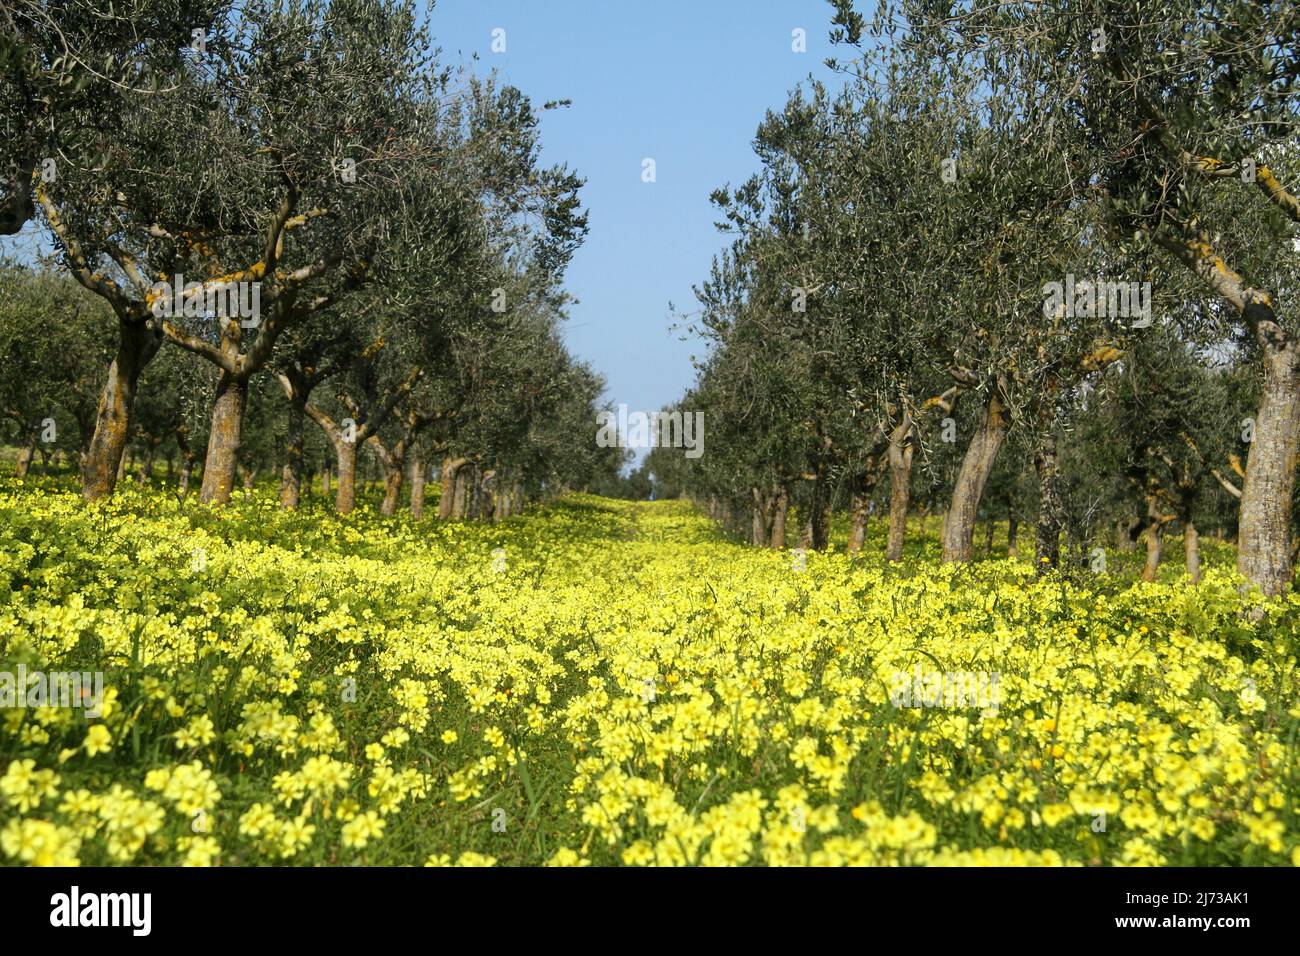 Oxalis pes-caprae (Bowie's wood-sorrel/ Bermuda buttercup) plants in bloom in an orchard in Southern Italy Stock Photo